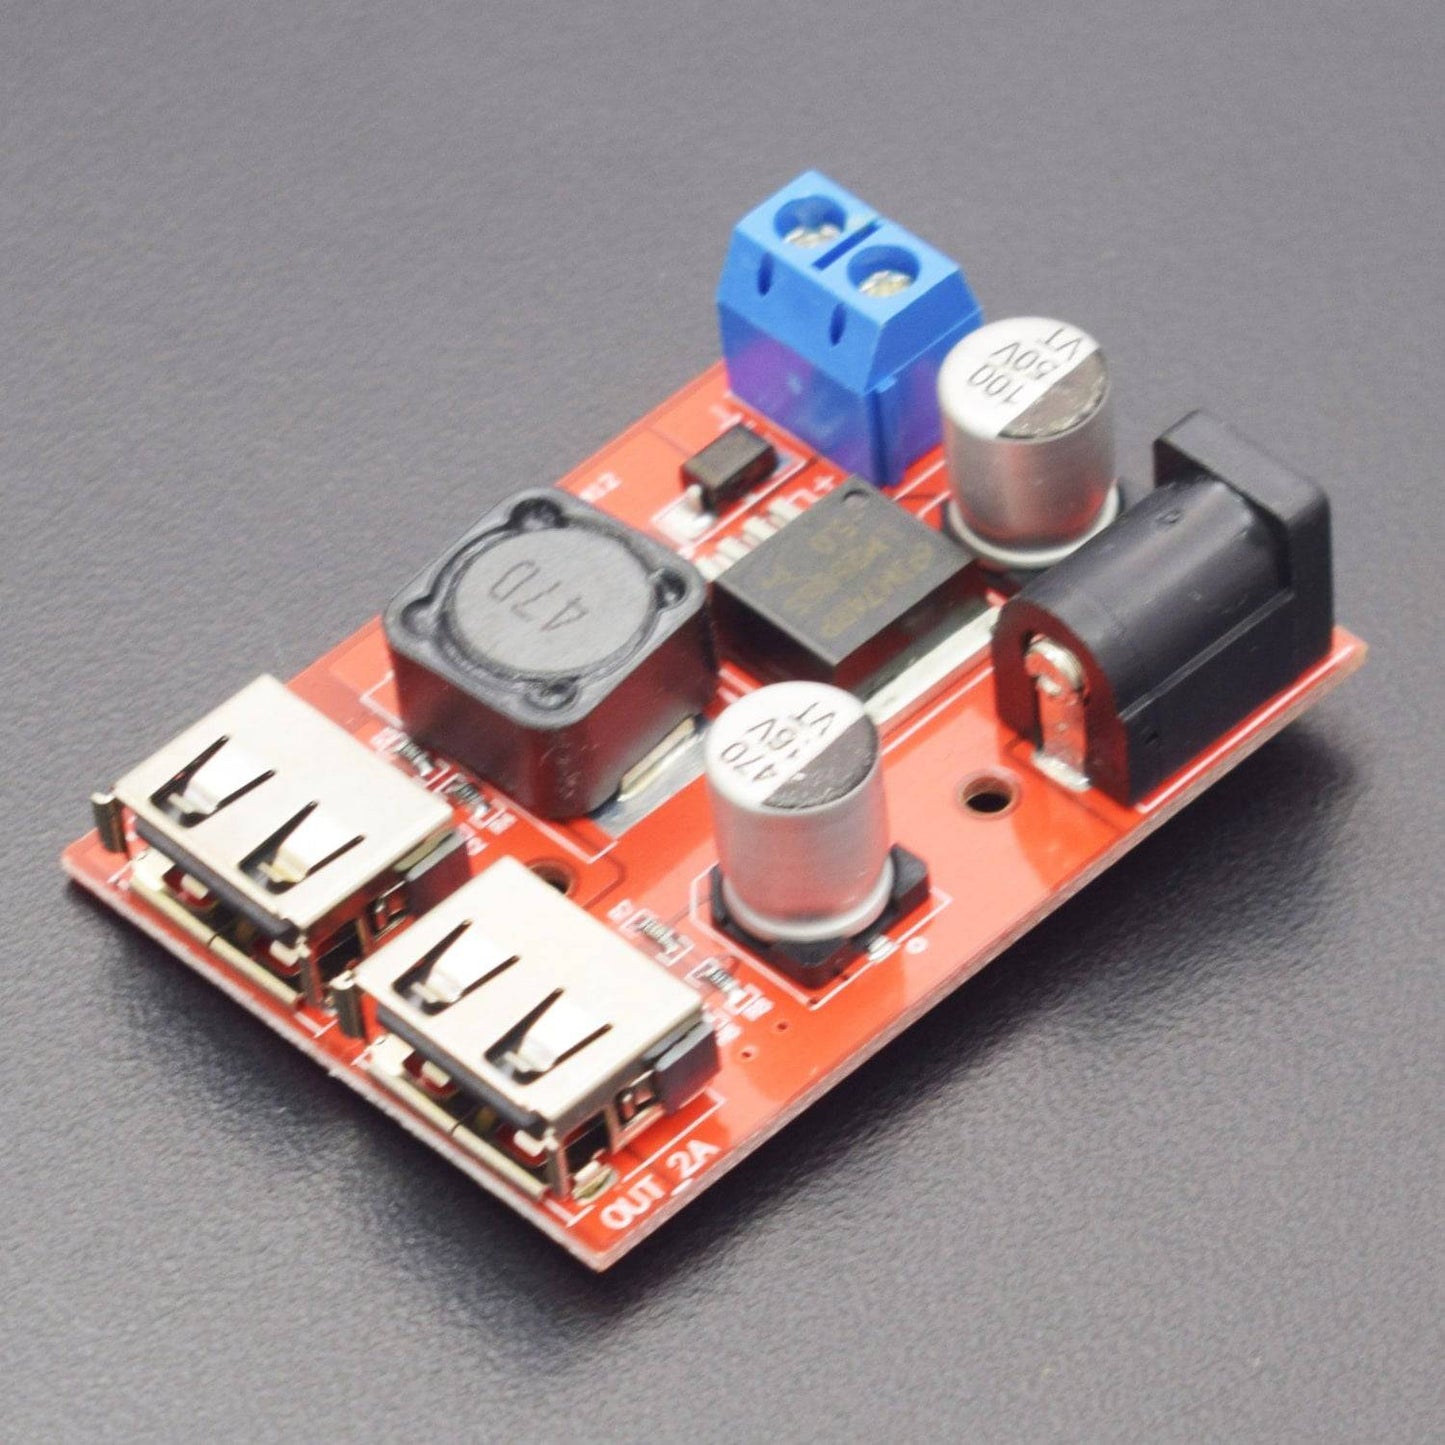 DC-DC Voltage Regulator LM2596S Buck Converter Step Down Power Supply Module 6-40V to 5V 3A Dual USB- RS1814 - REES52